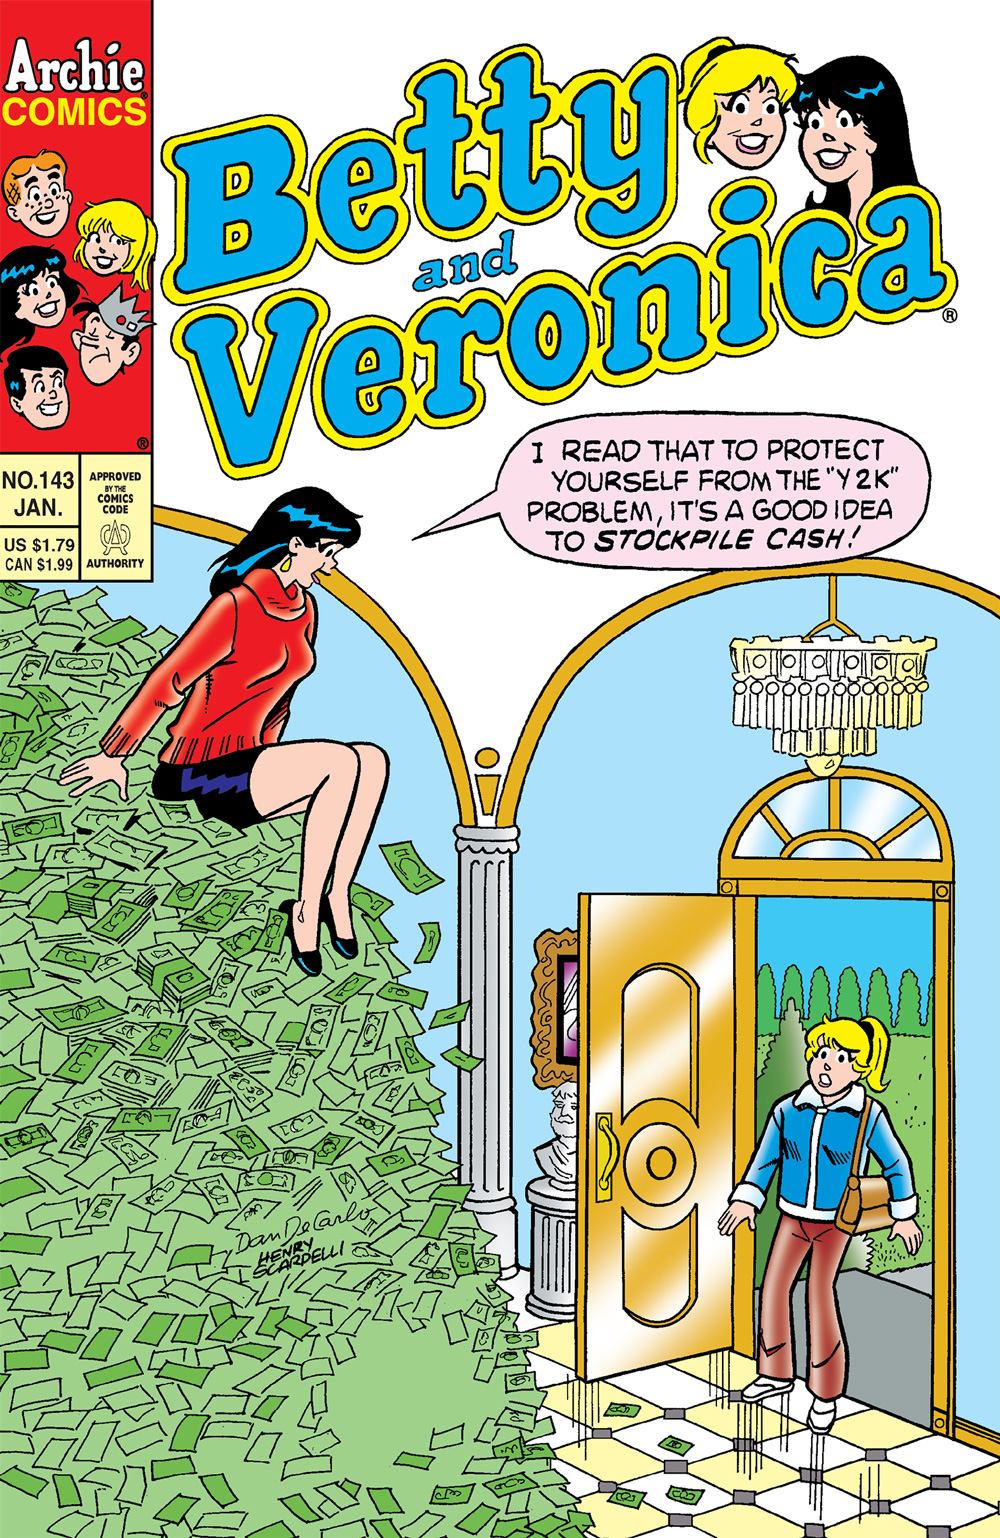 Betty walks into the Lodge mansion and sees Veronica sitting on a huge pile of money. She says she's stockpiling cash for Y2K, which is a joke you won't understand if you were born before 1990.